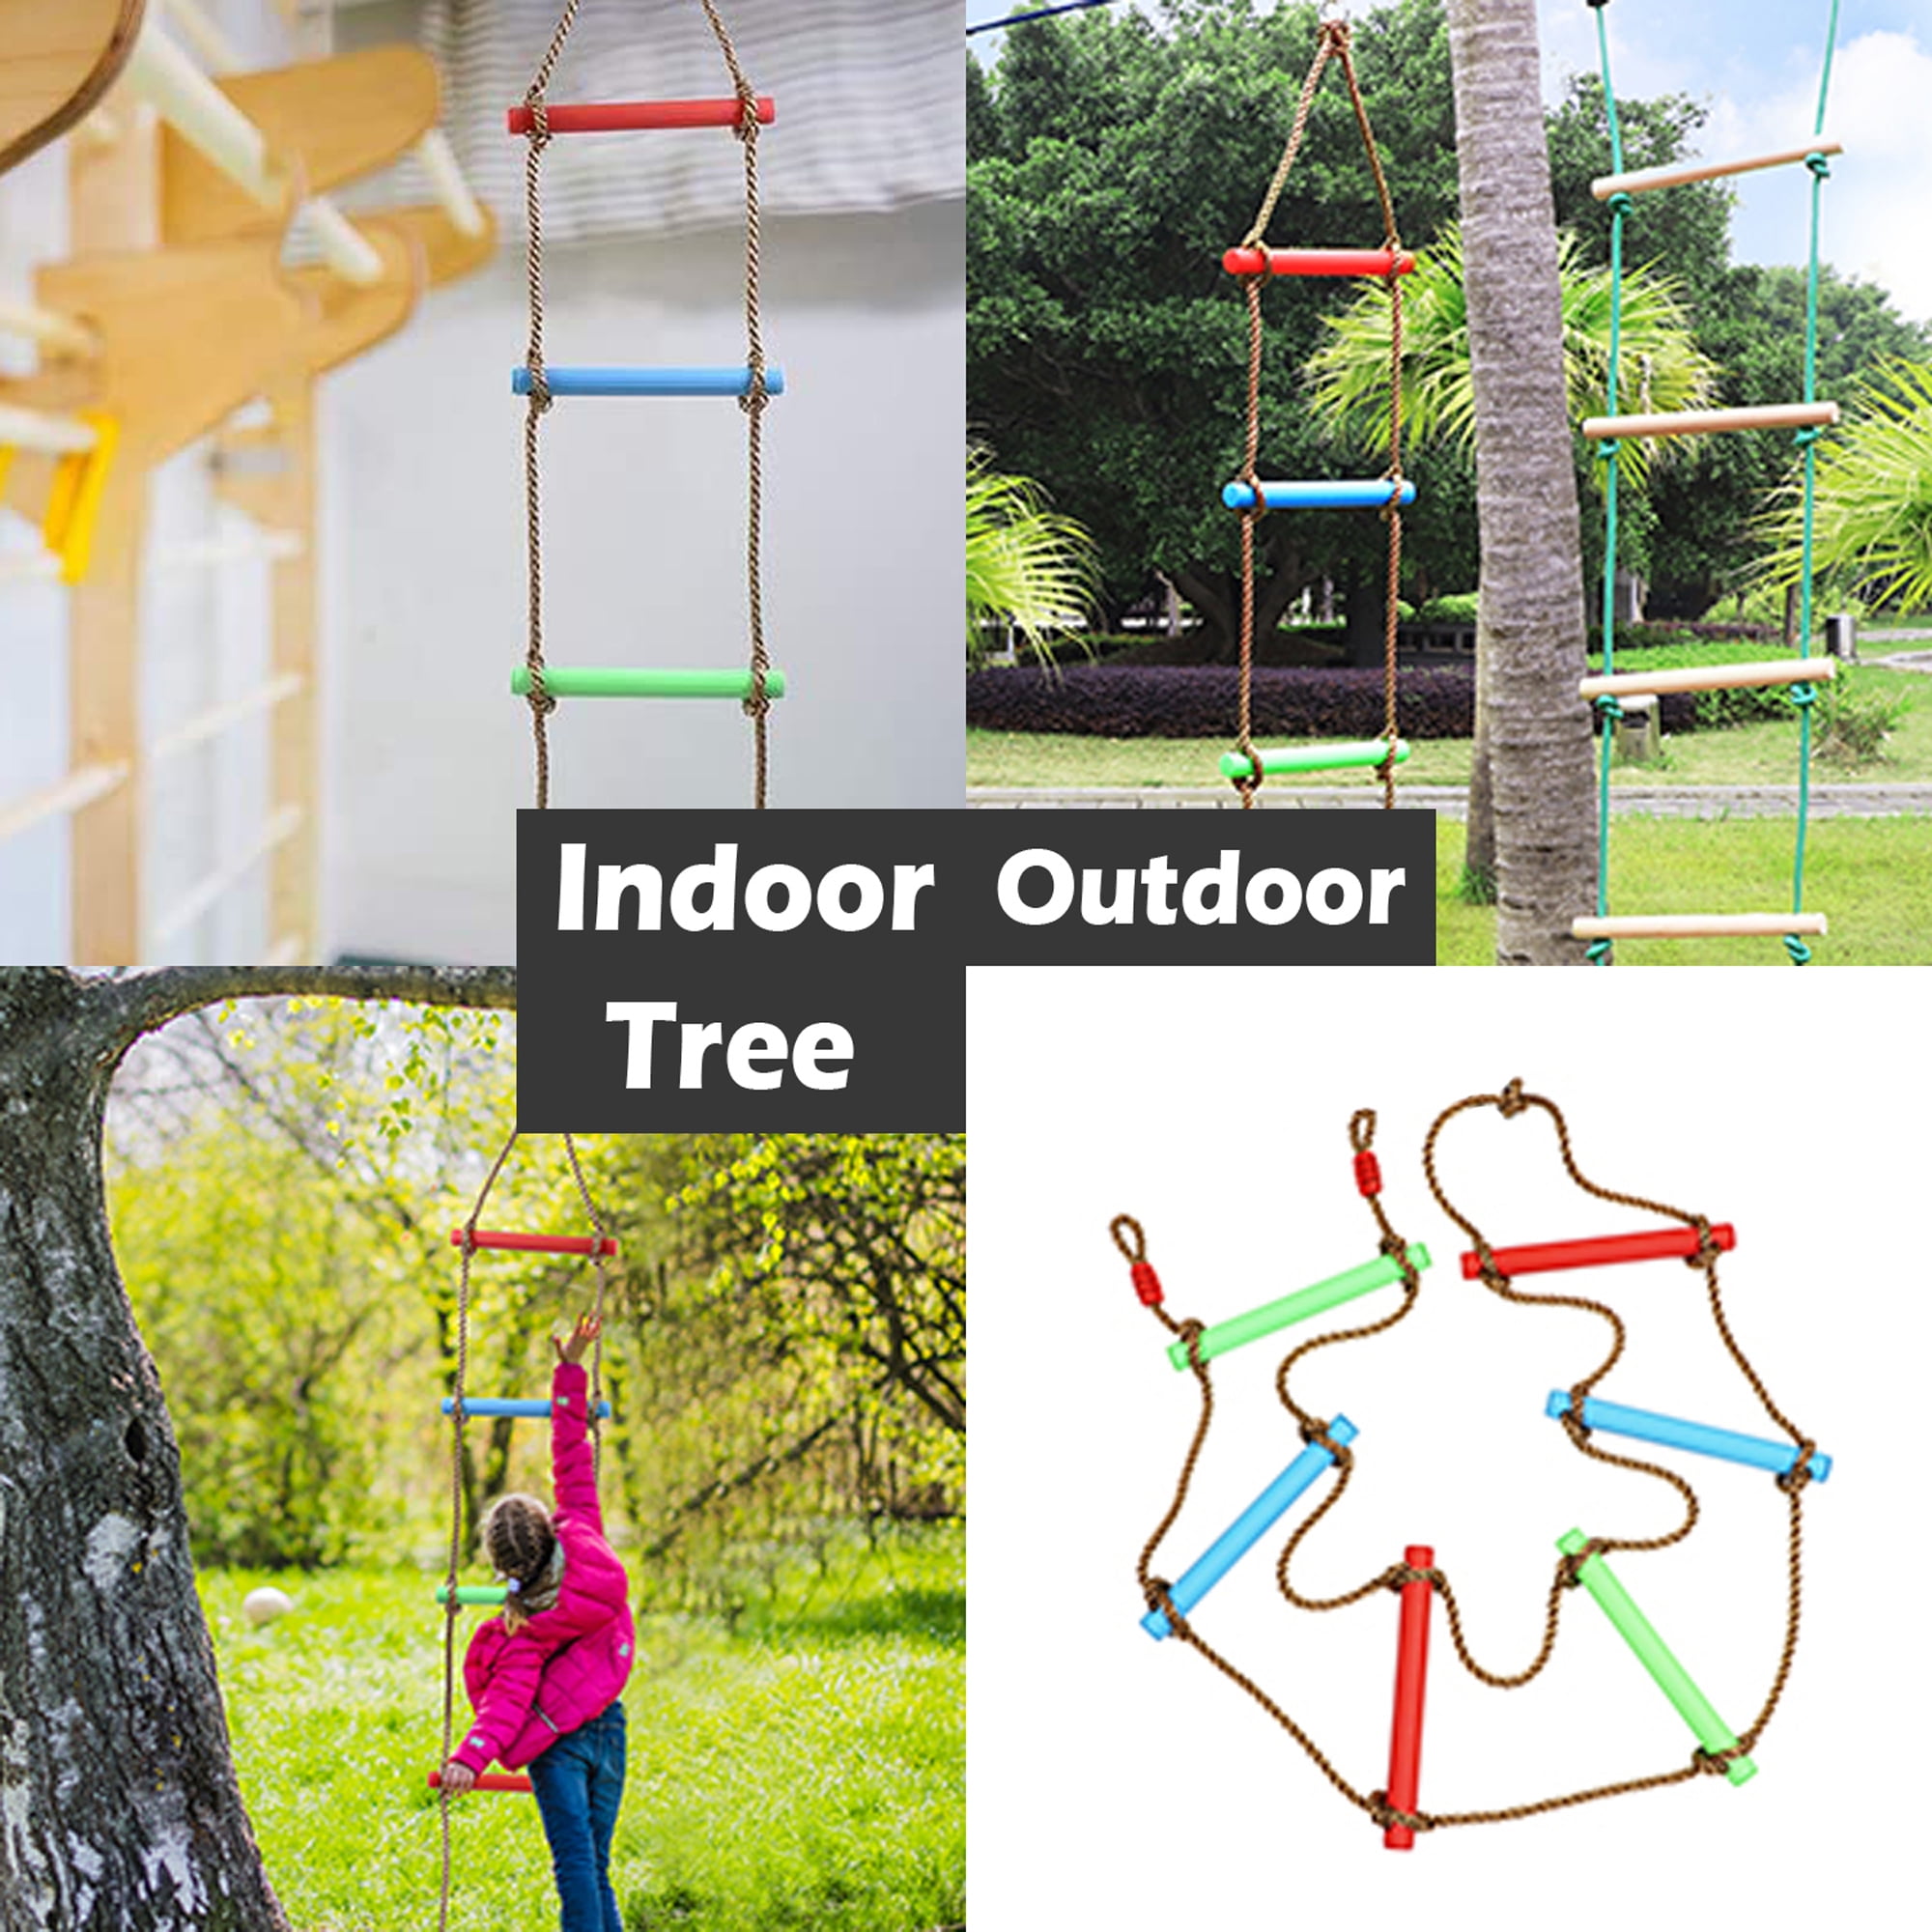 Tree Ladder Toy for Kids or Adult Aged 6-12 Years Old LIOOBO 5.7 ft Climbing Rope Ladder,Tree Climbing Rope for Swing Set Tree House Accessories 